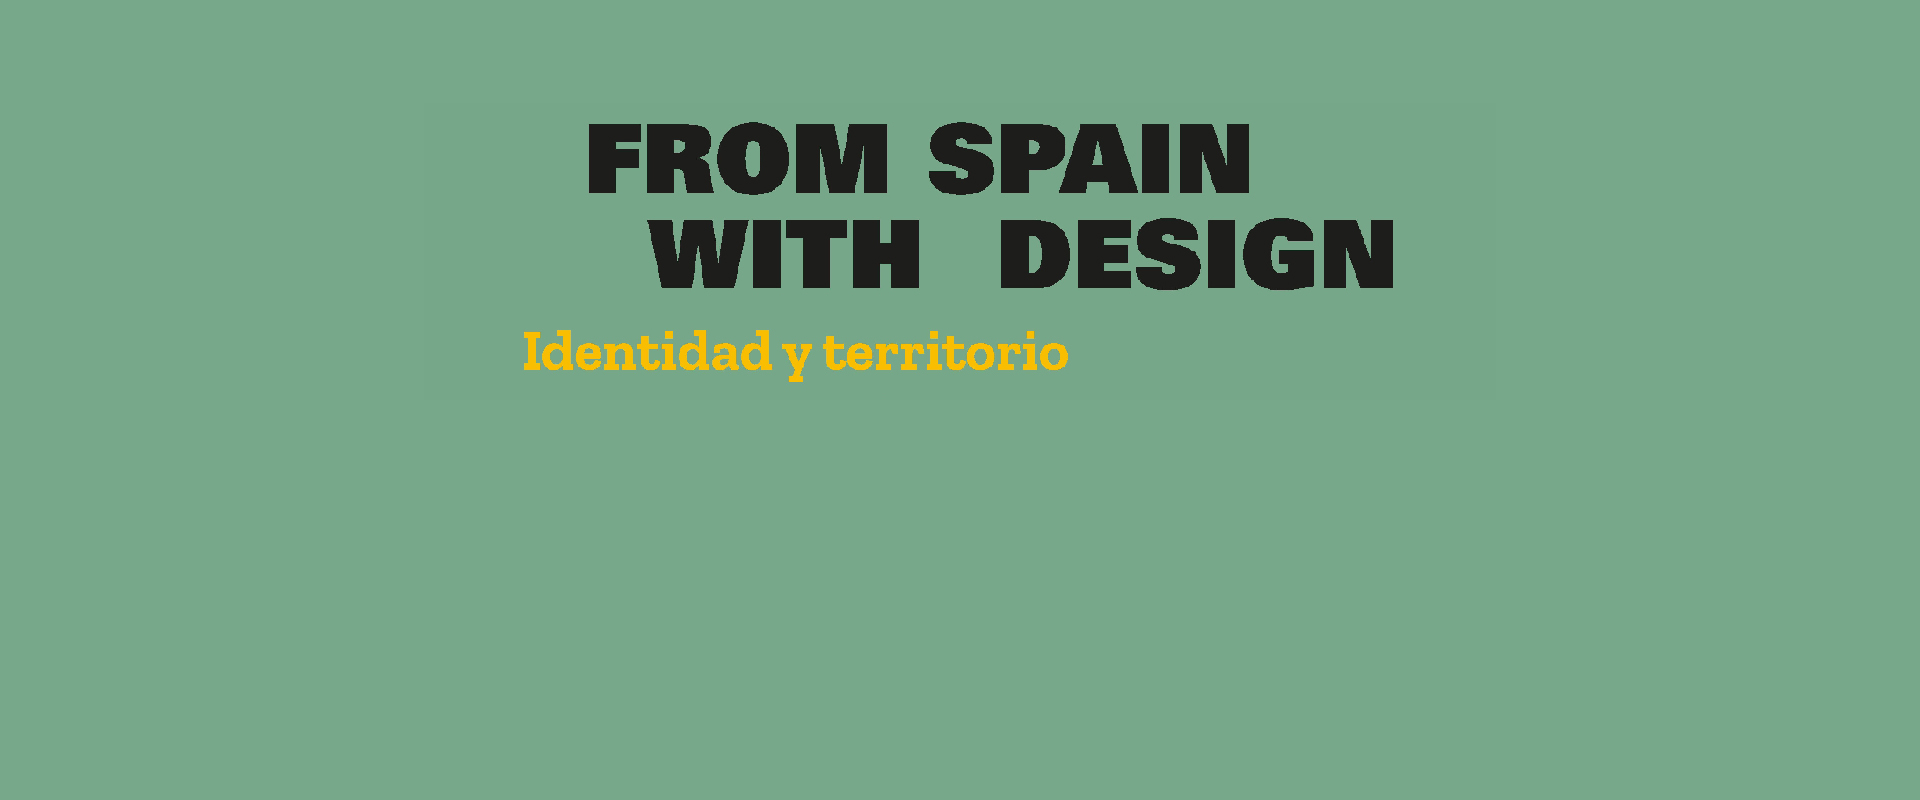 From Spain With Design